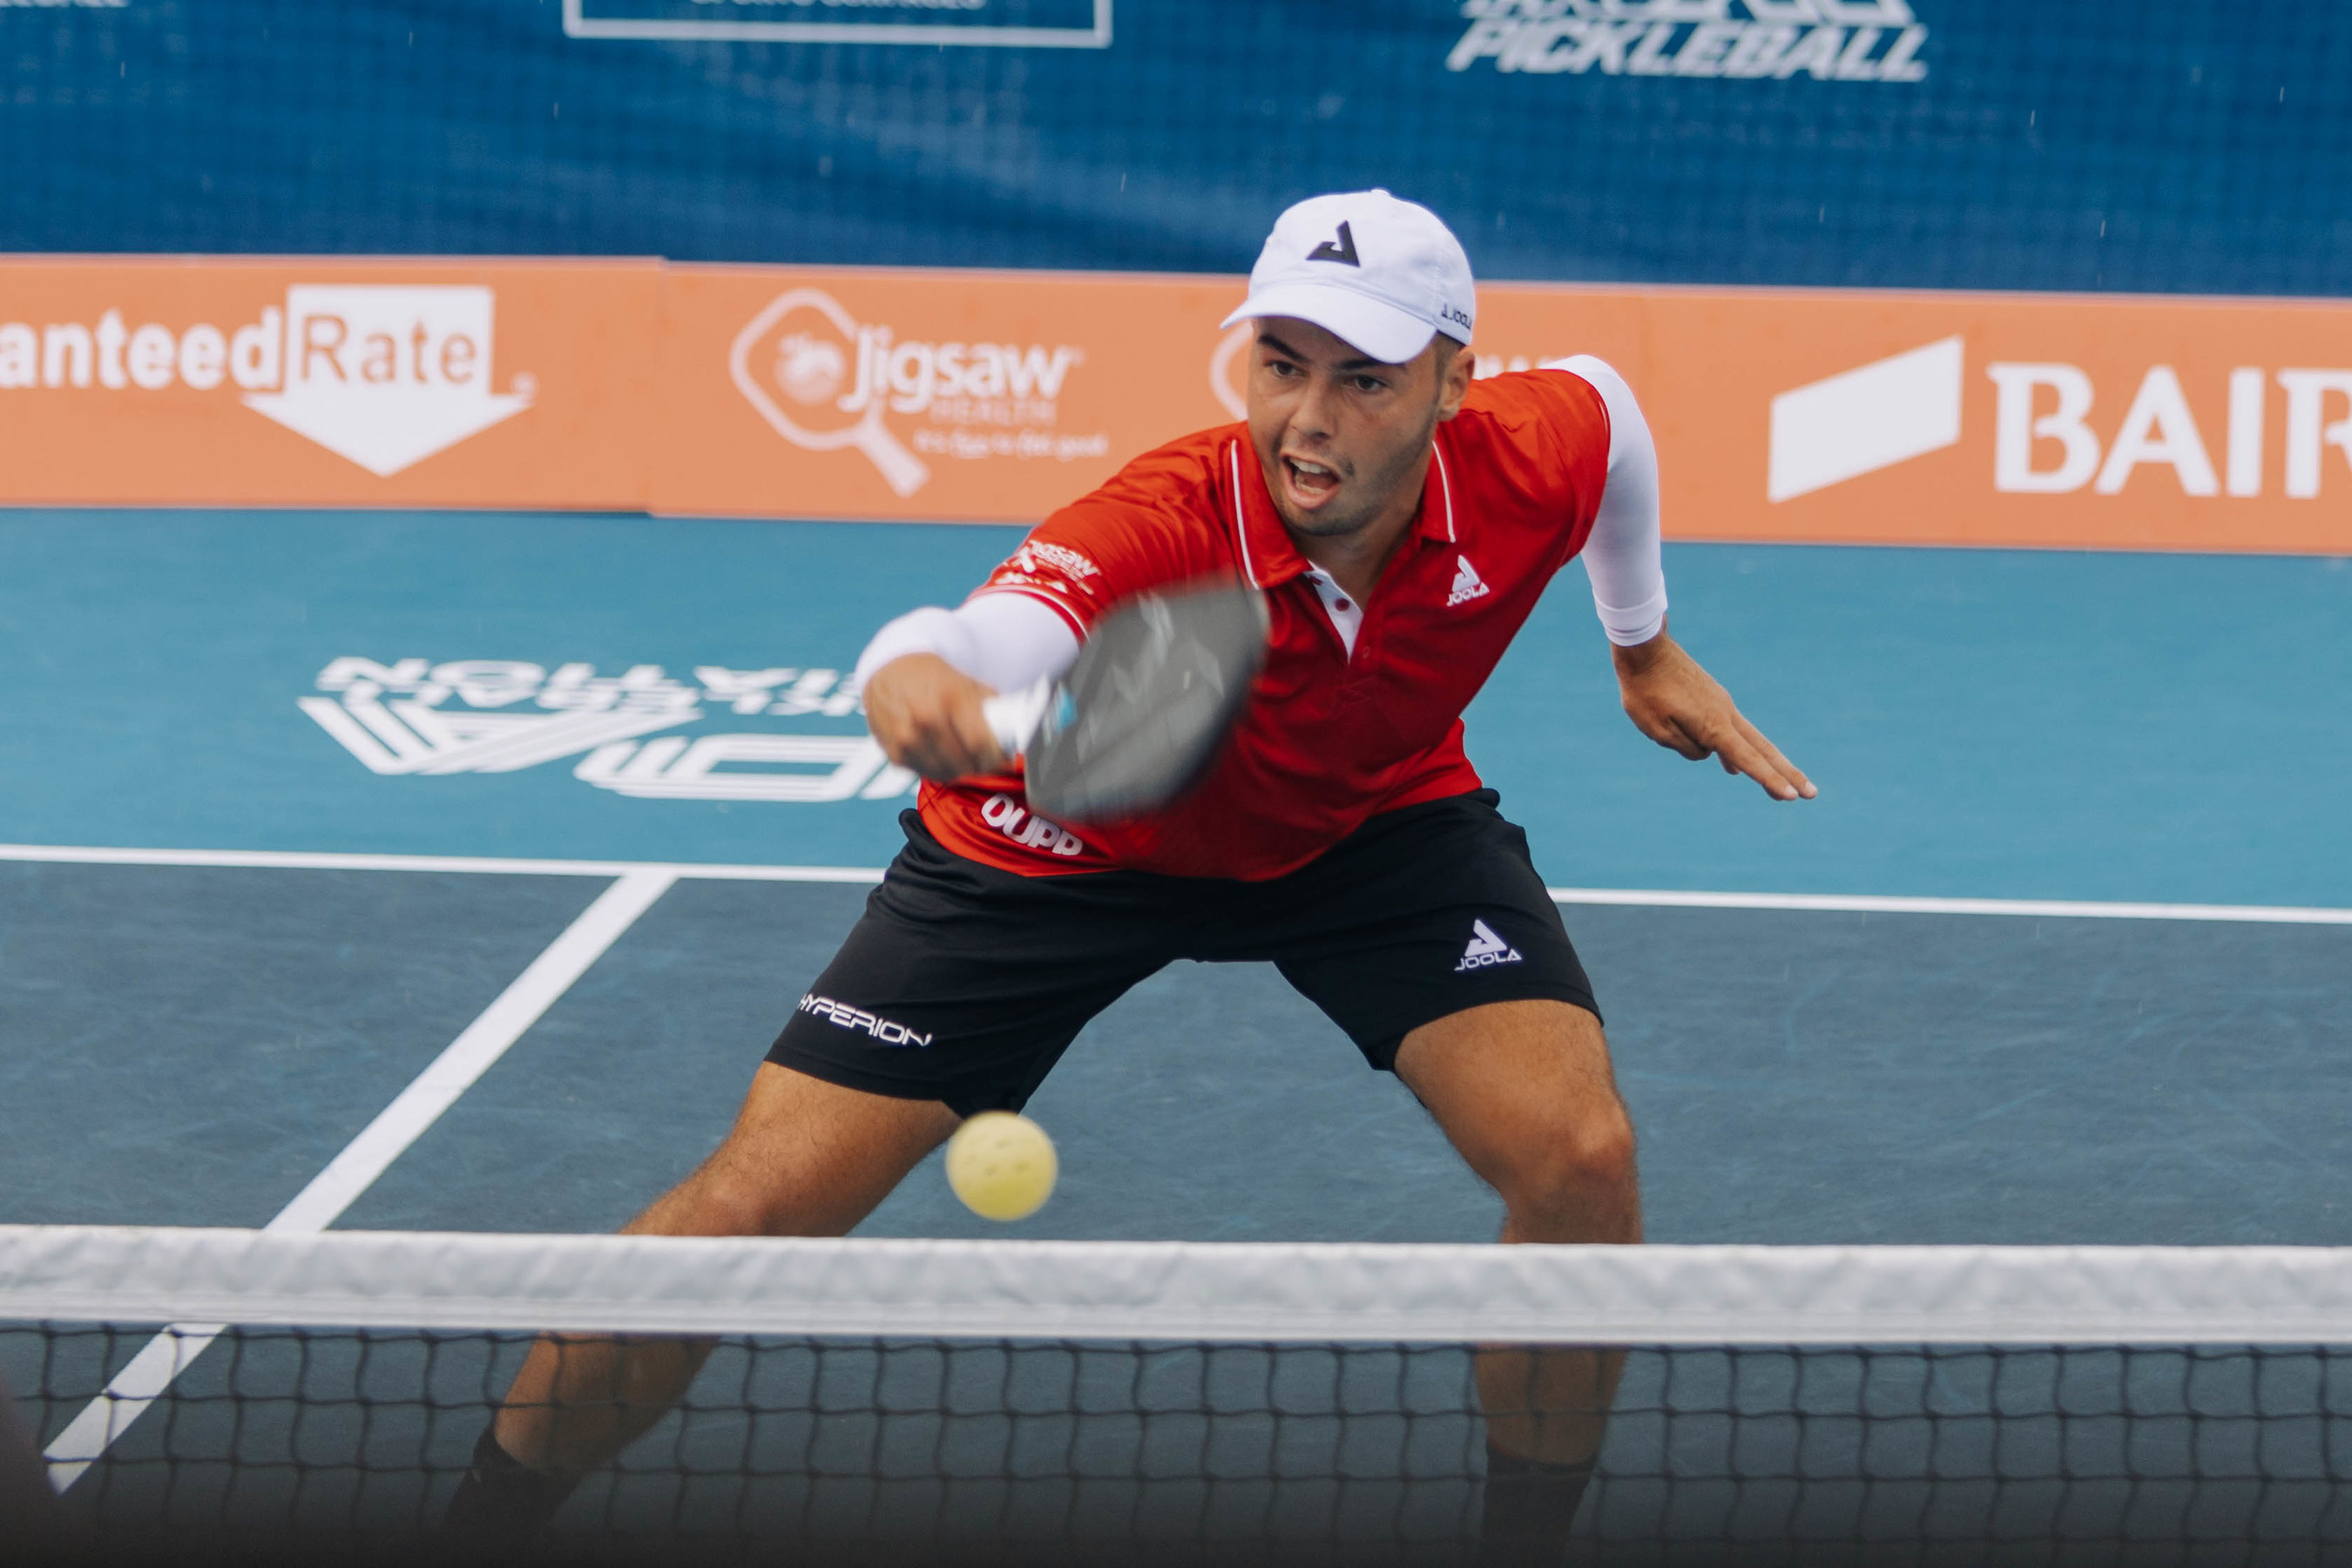 CBS will broadcast the Professional Pickleball Association summer championships live this month